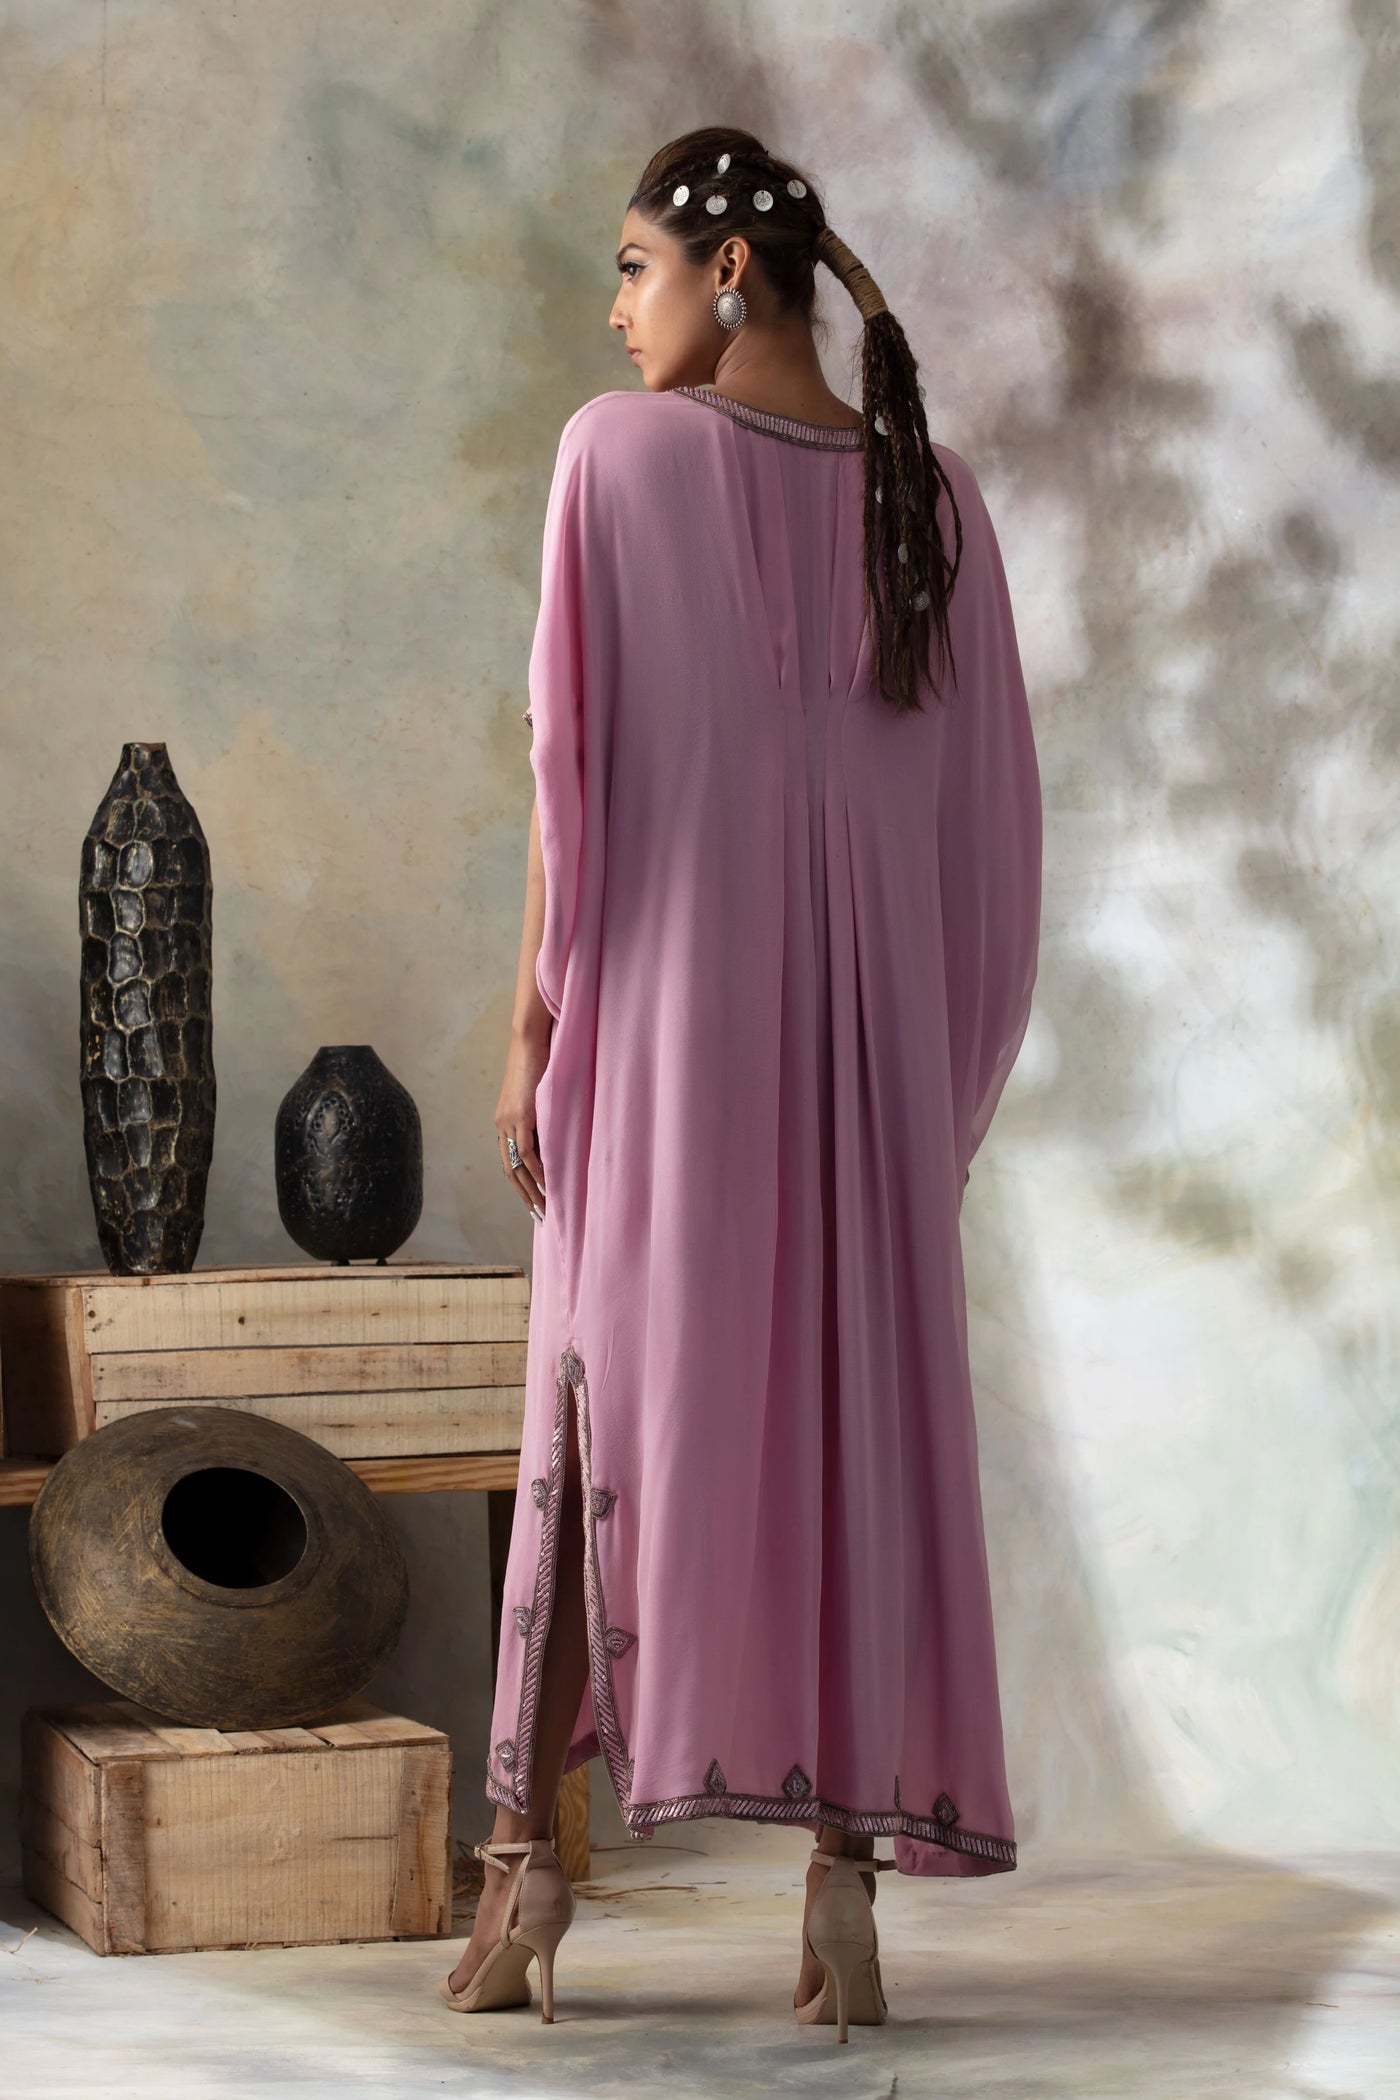 Soft Lilac Kaftan Indian Clothing in Denver, CO, Aurora, CO, Boulder, CO, Fort Collins, CO, Colorado Springs, CO, Parker, CO, Highlands Ranch, CO, Cherry Creek, CO, Centennial, CO, and Longmont, CO. NATIONWIDE SHIPPING USA- India Fashion X